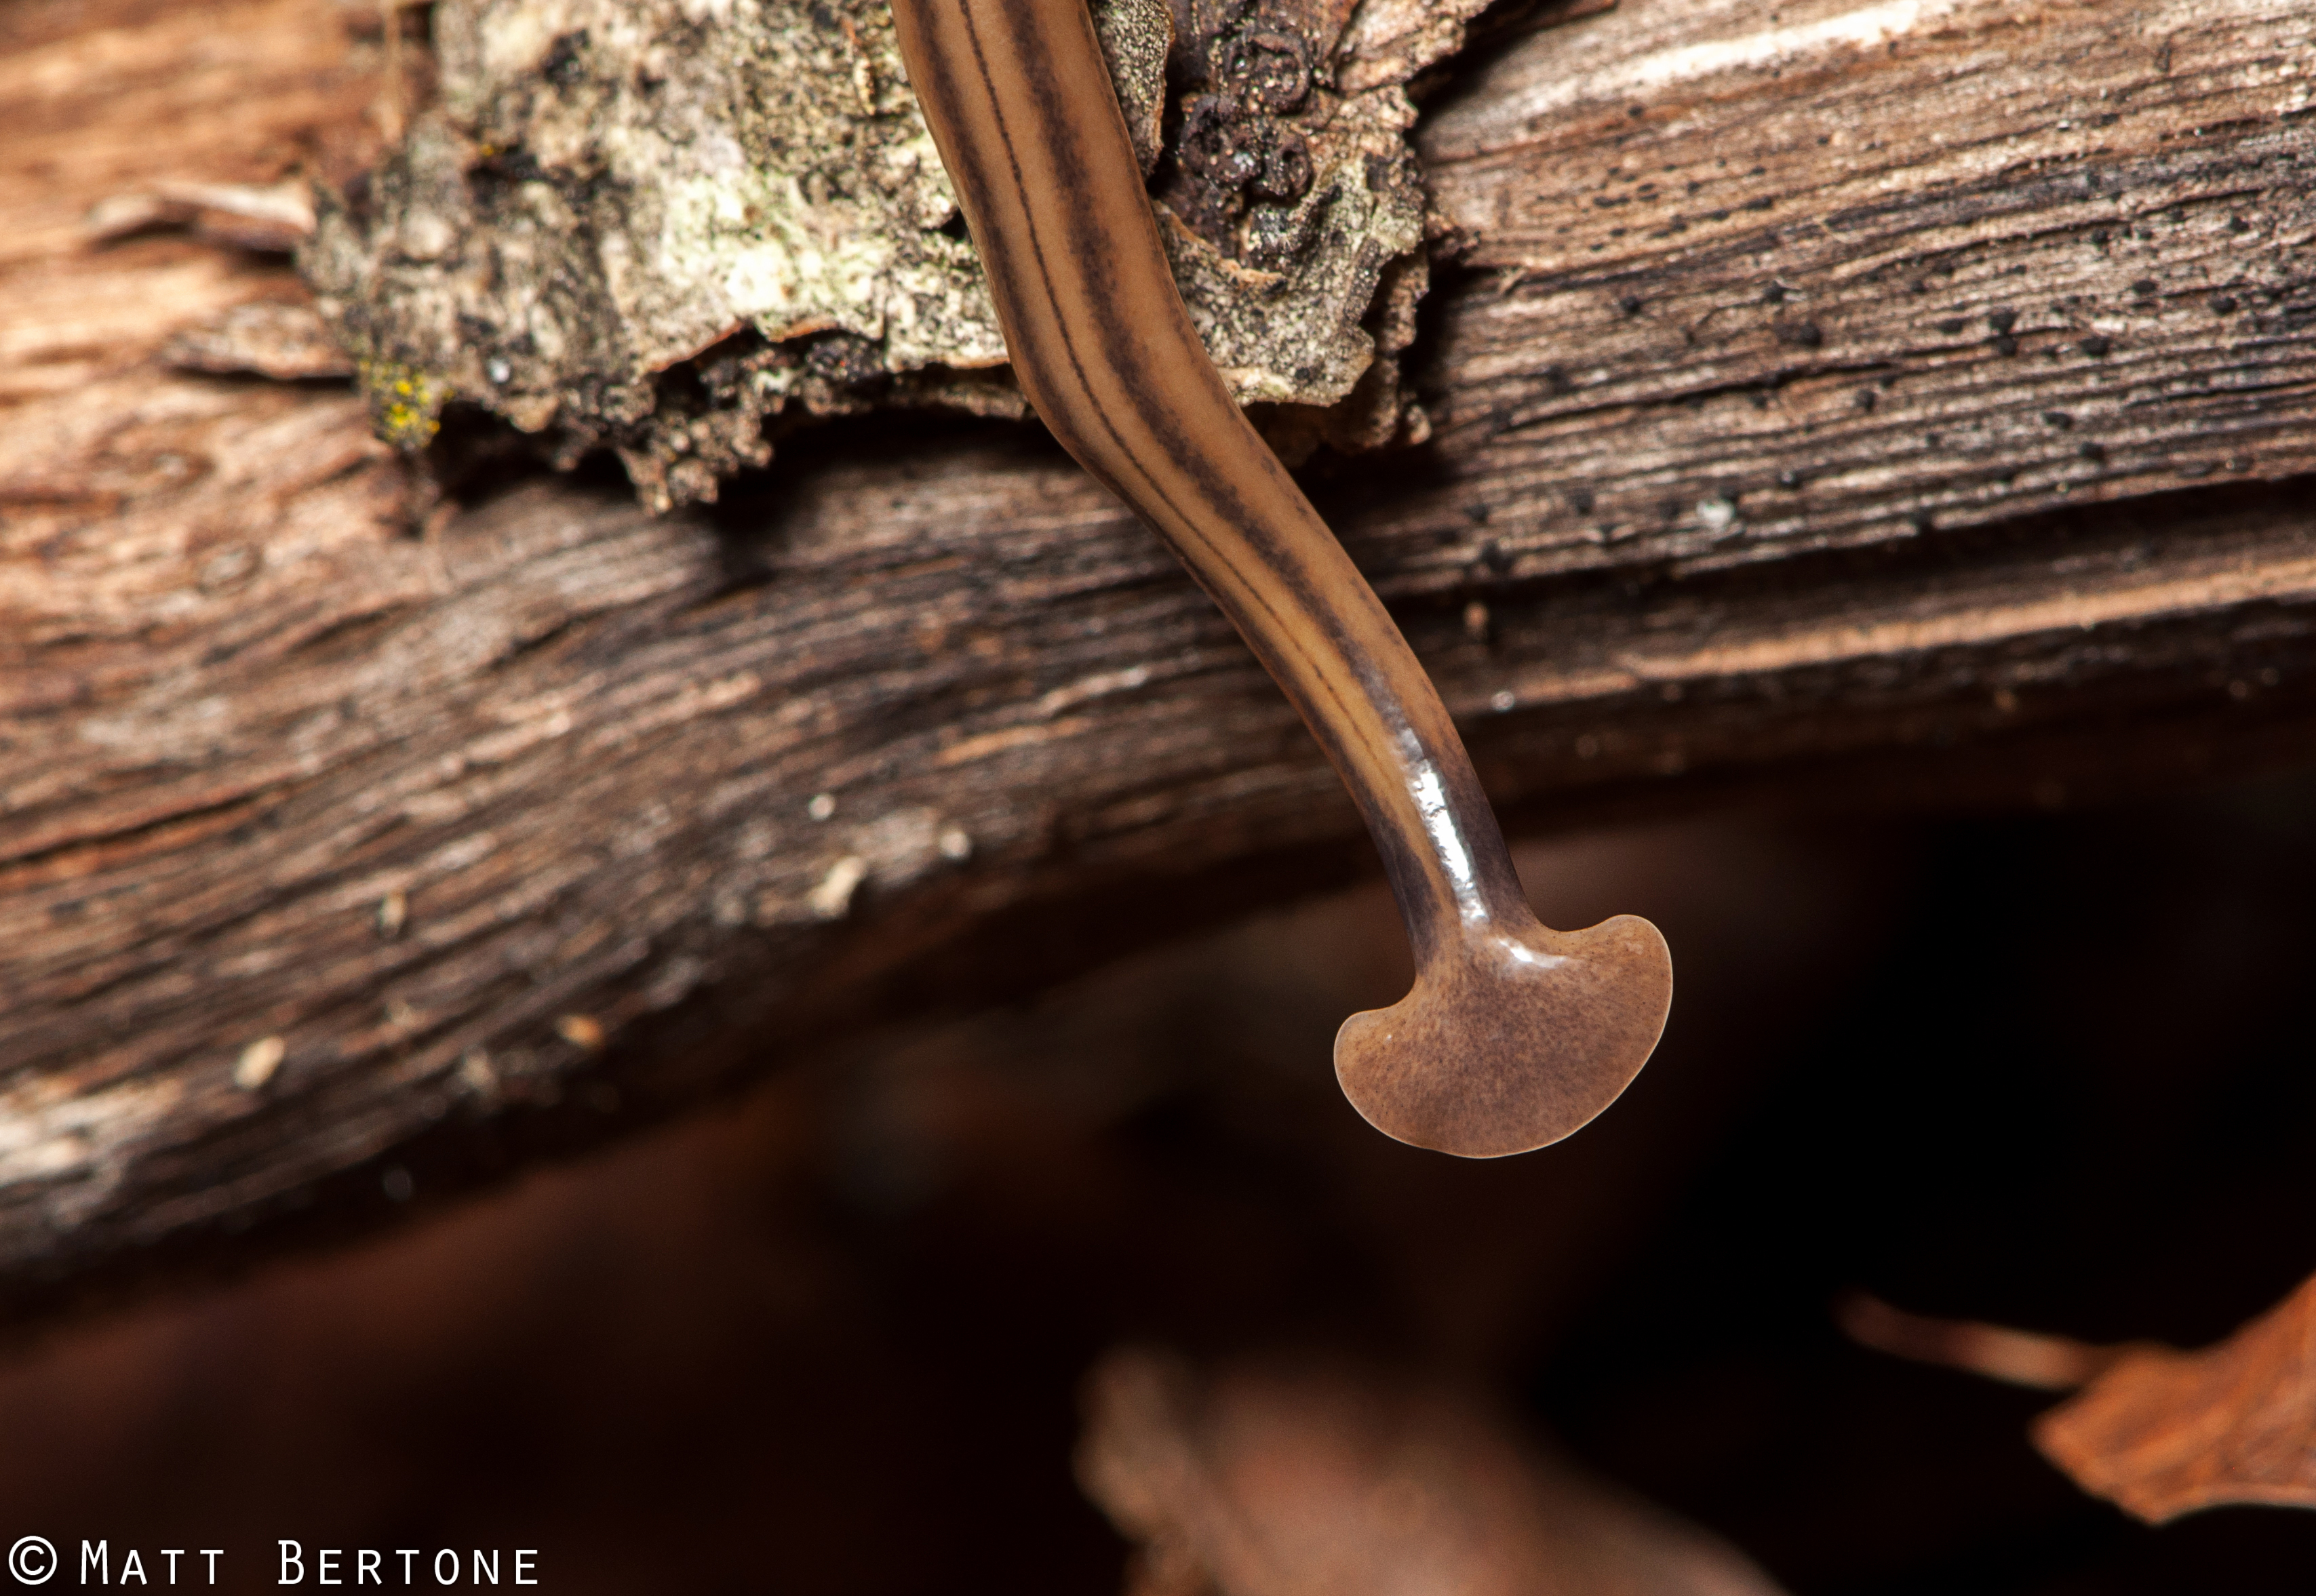 The semi-circular head of flatworms in the genus Bipalium (and closely related genera) house sensory organs and numerous tiny eyes, and also give rise to their common name, hammerhead worms.